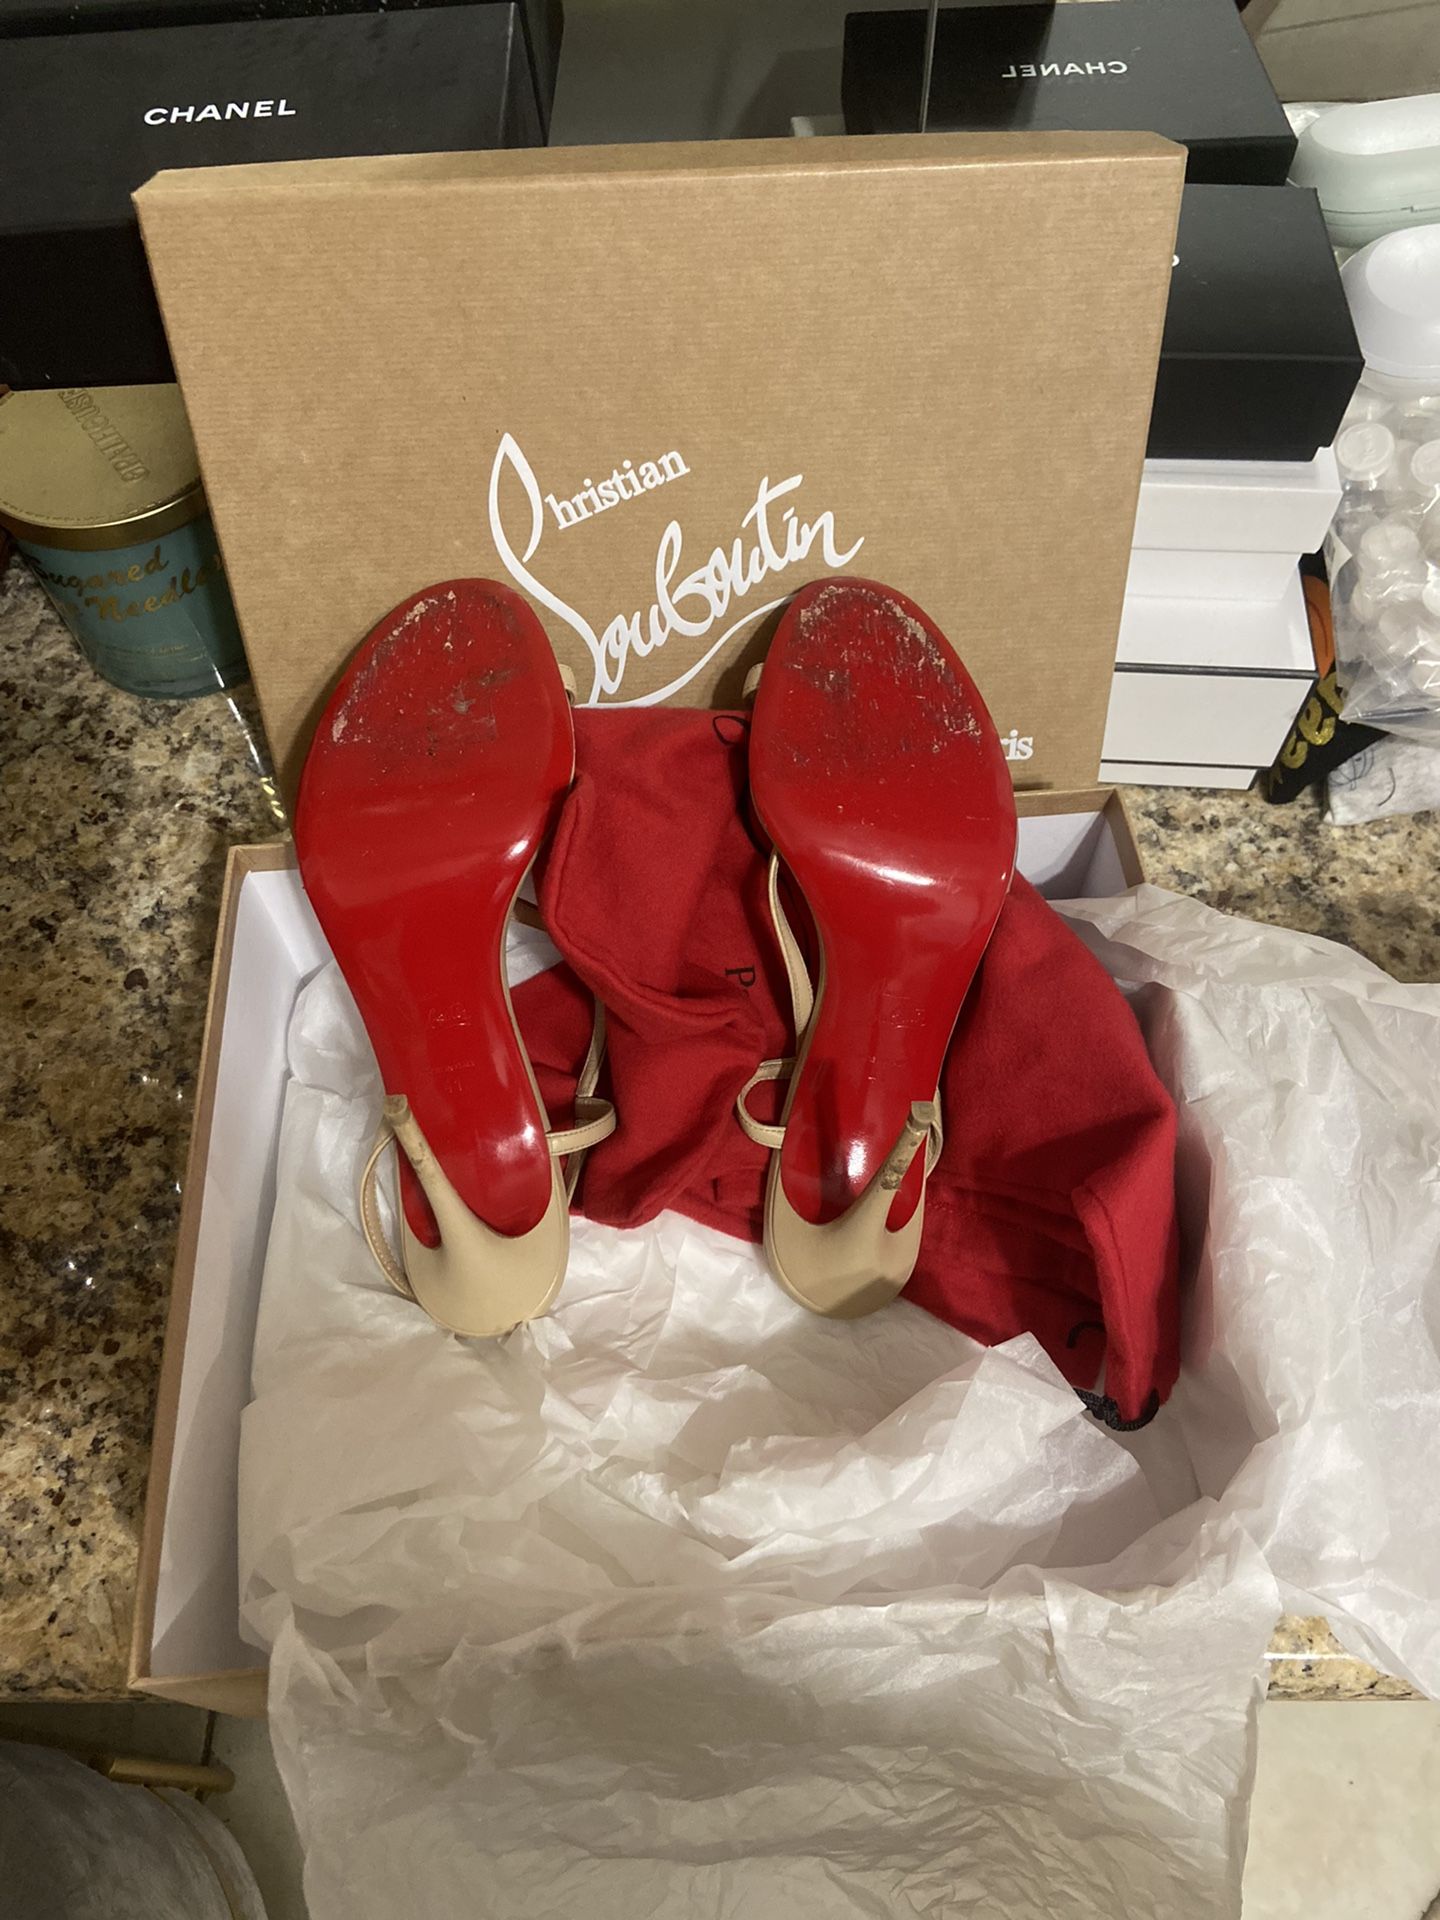 Christian Louboutin Spike Heels Size 35 Beige for Sale in Cty Of Cmmrce, CA  - OfferUp